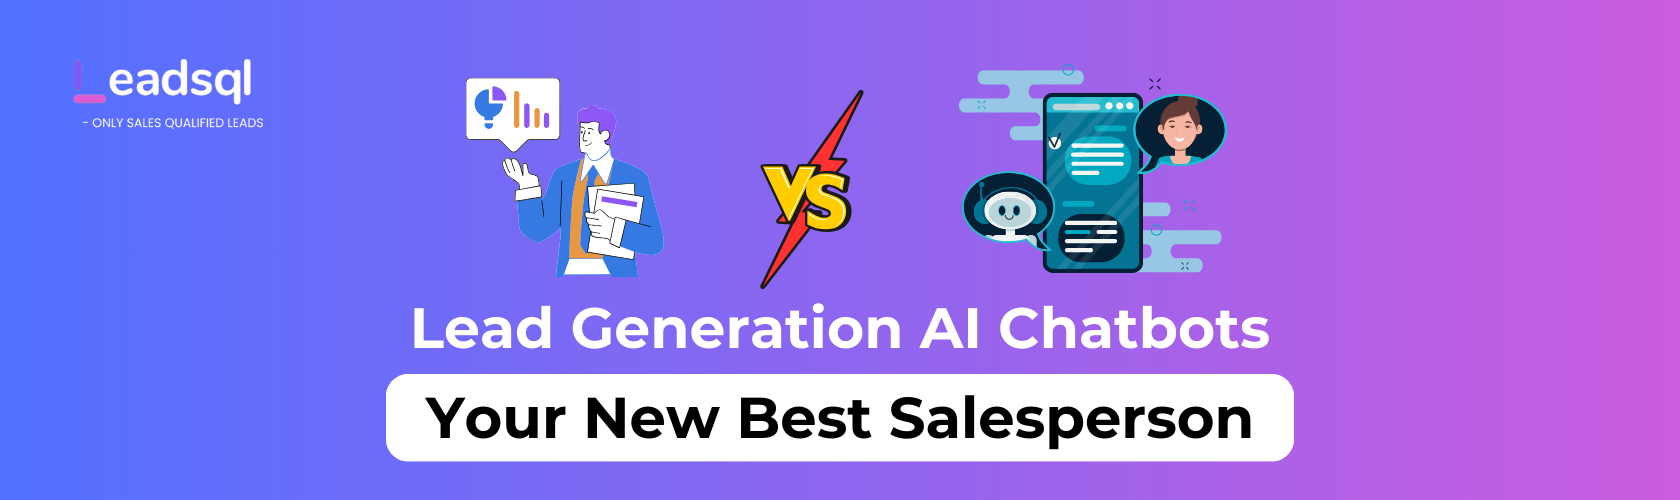 Lead Generation AI Chatbots: Your New Best Salesperson